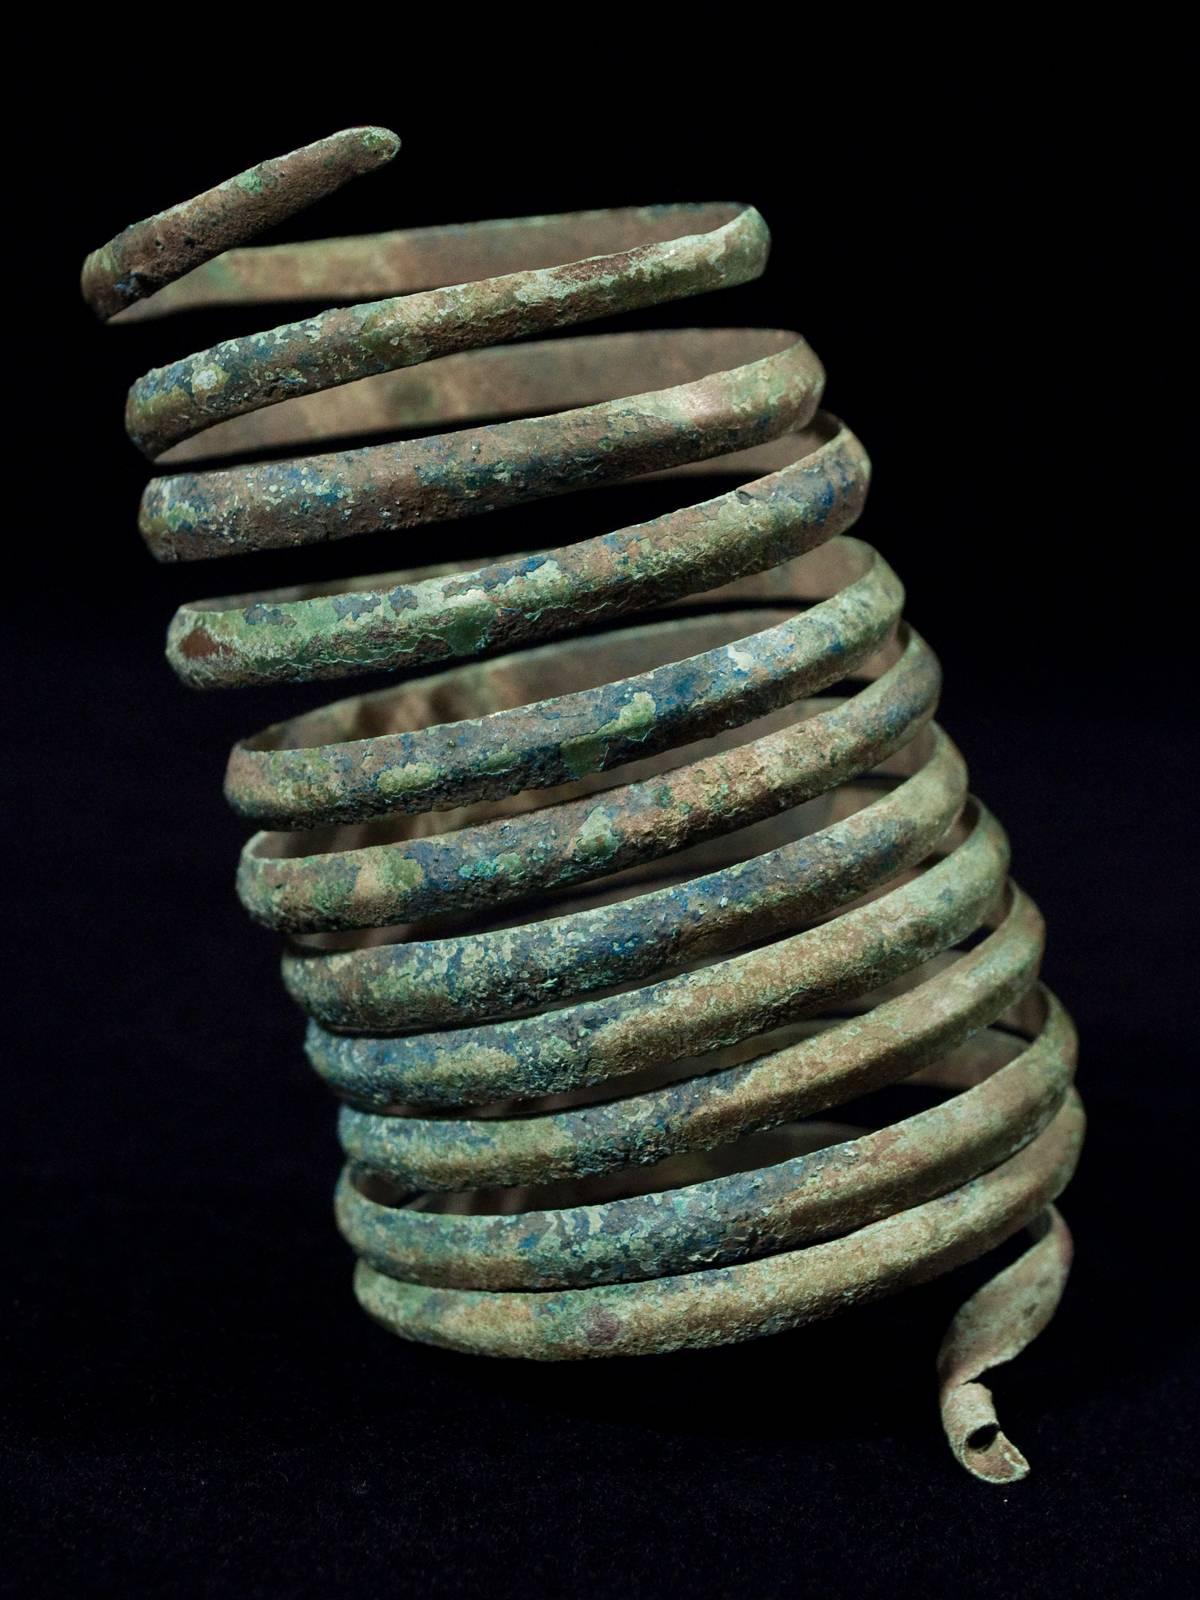 Offered by Zena Kruzick.
Ancient near eastern coiled bronze bracelet.

Measures: 4.75" (12 cm) high, 7.25" (21 cm) upper circumference, 8.75" lower circumference.
Late 2nd-early 1st century B.C.
Formed from a continuous band with